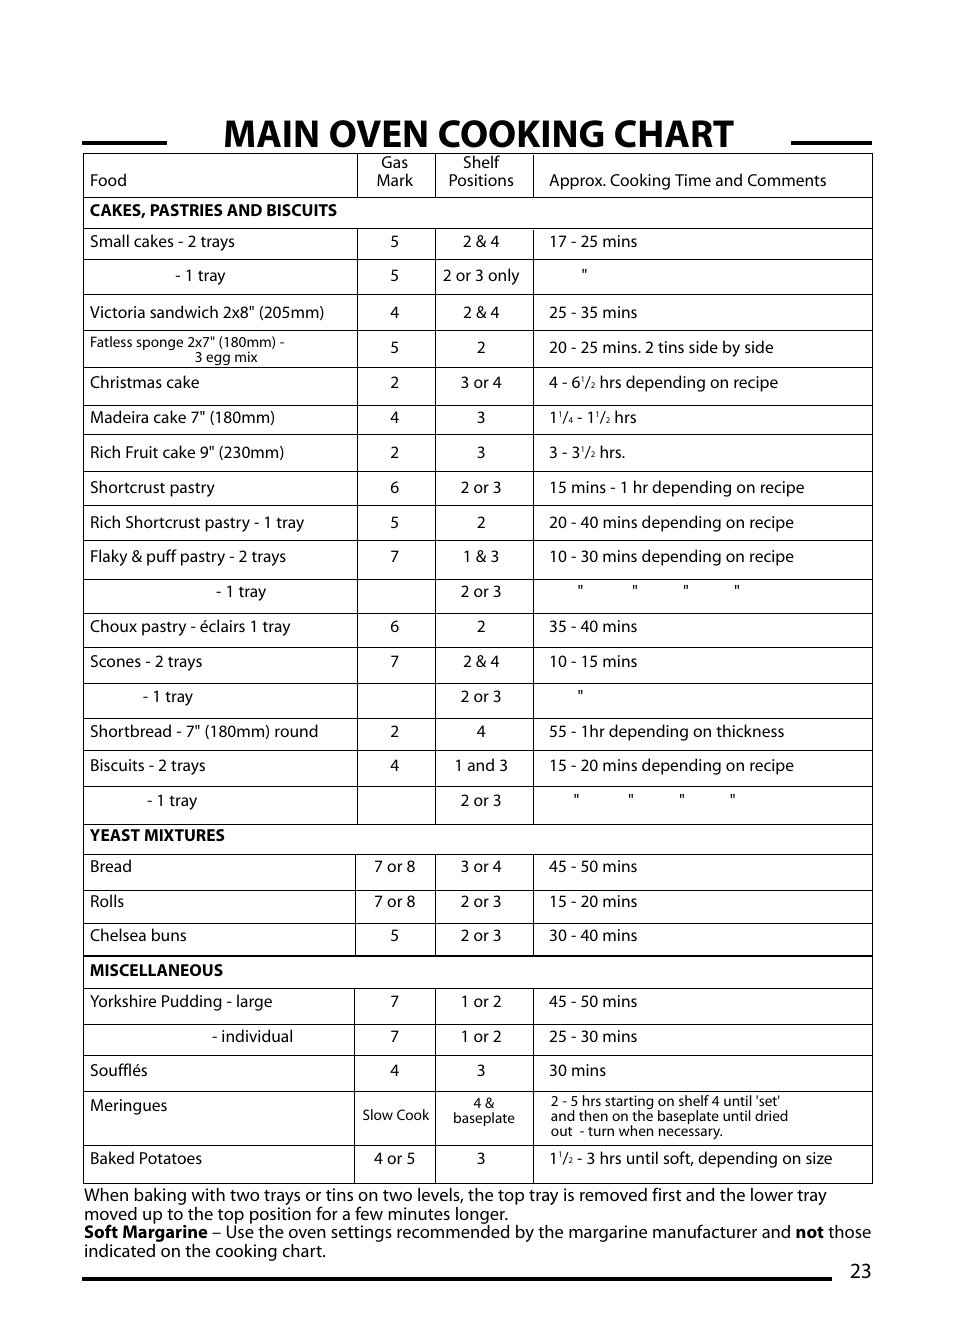 Main oven cooking chart | Cannon CHESTER 10540G User Manual | Page 23 / 36